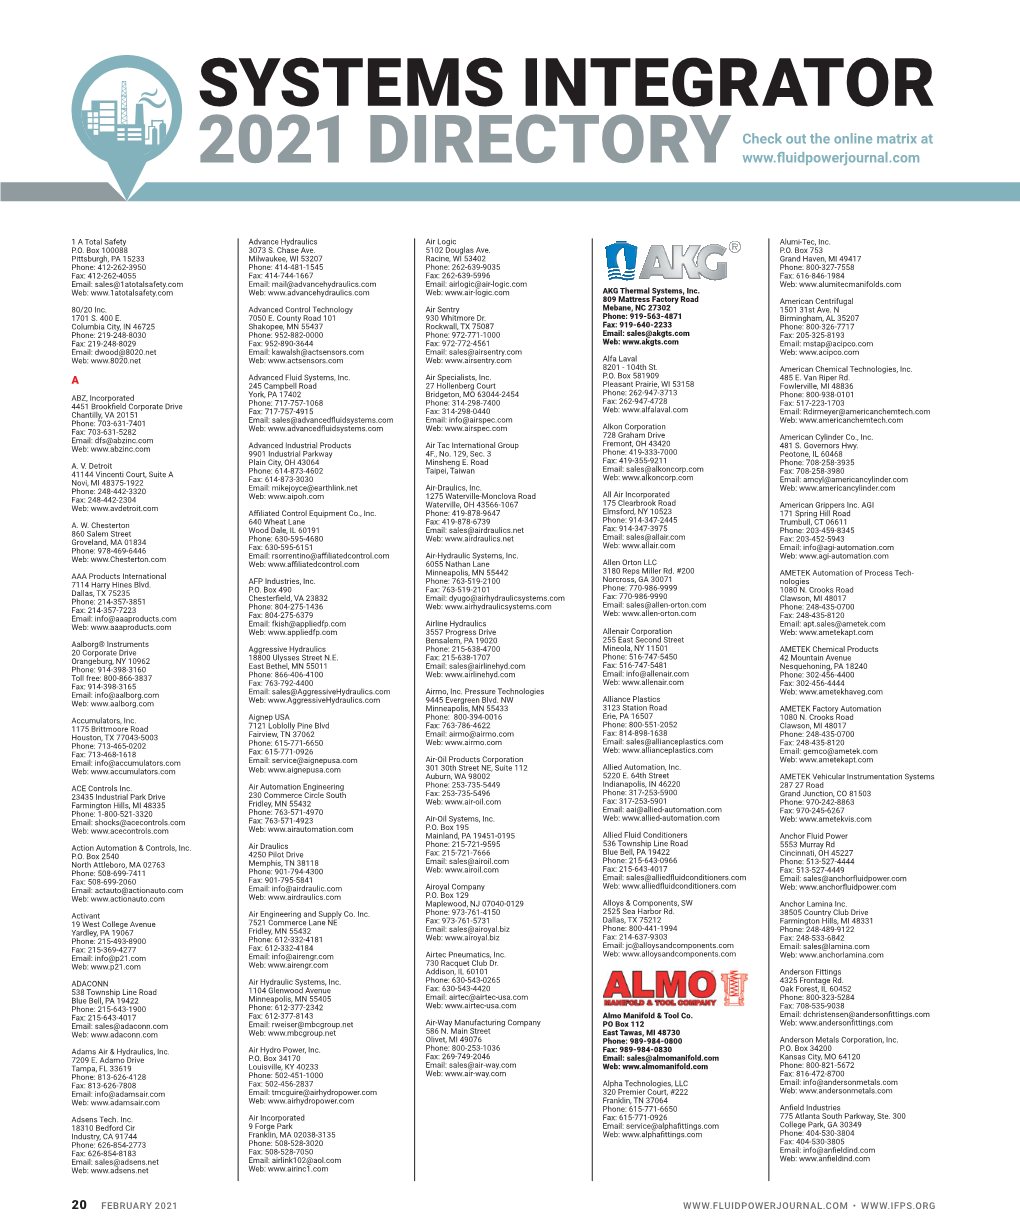 SYSTEMS INTEGRATOR Check out the Online Matrix at 2021 DIRECTORY